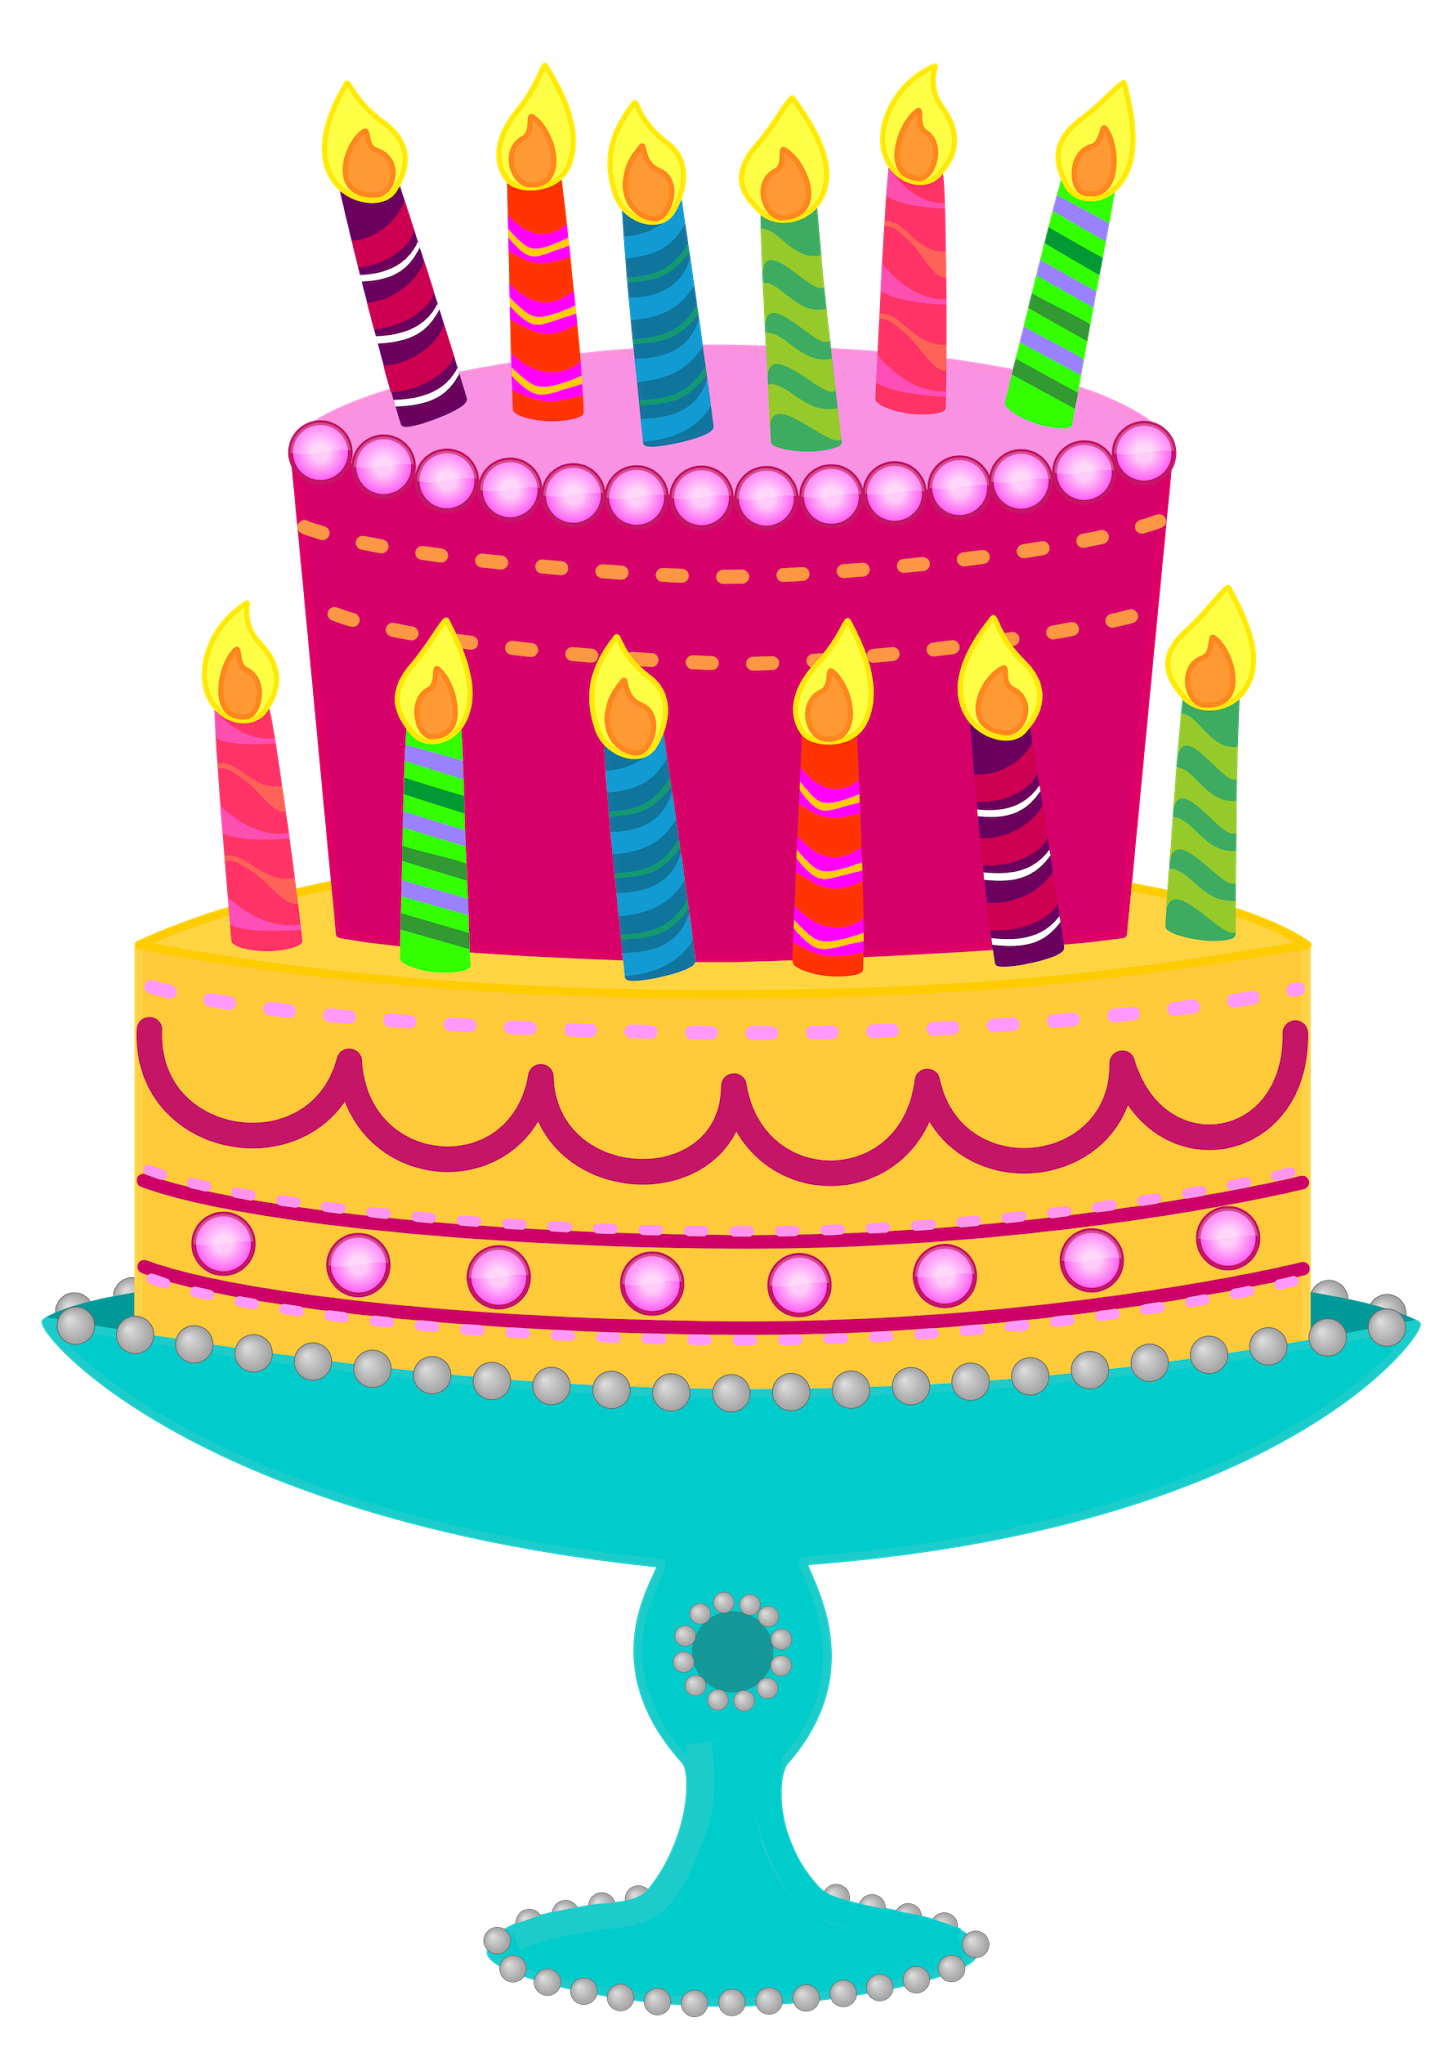 Download Free BIRTHDAY CAKE PNG transparent background and clipart